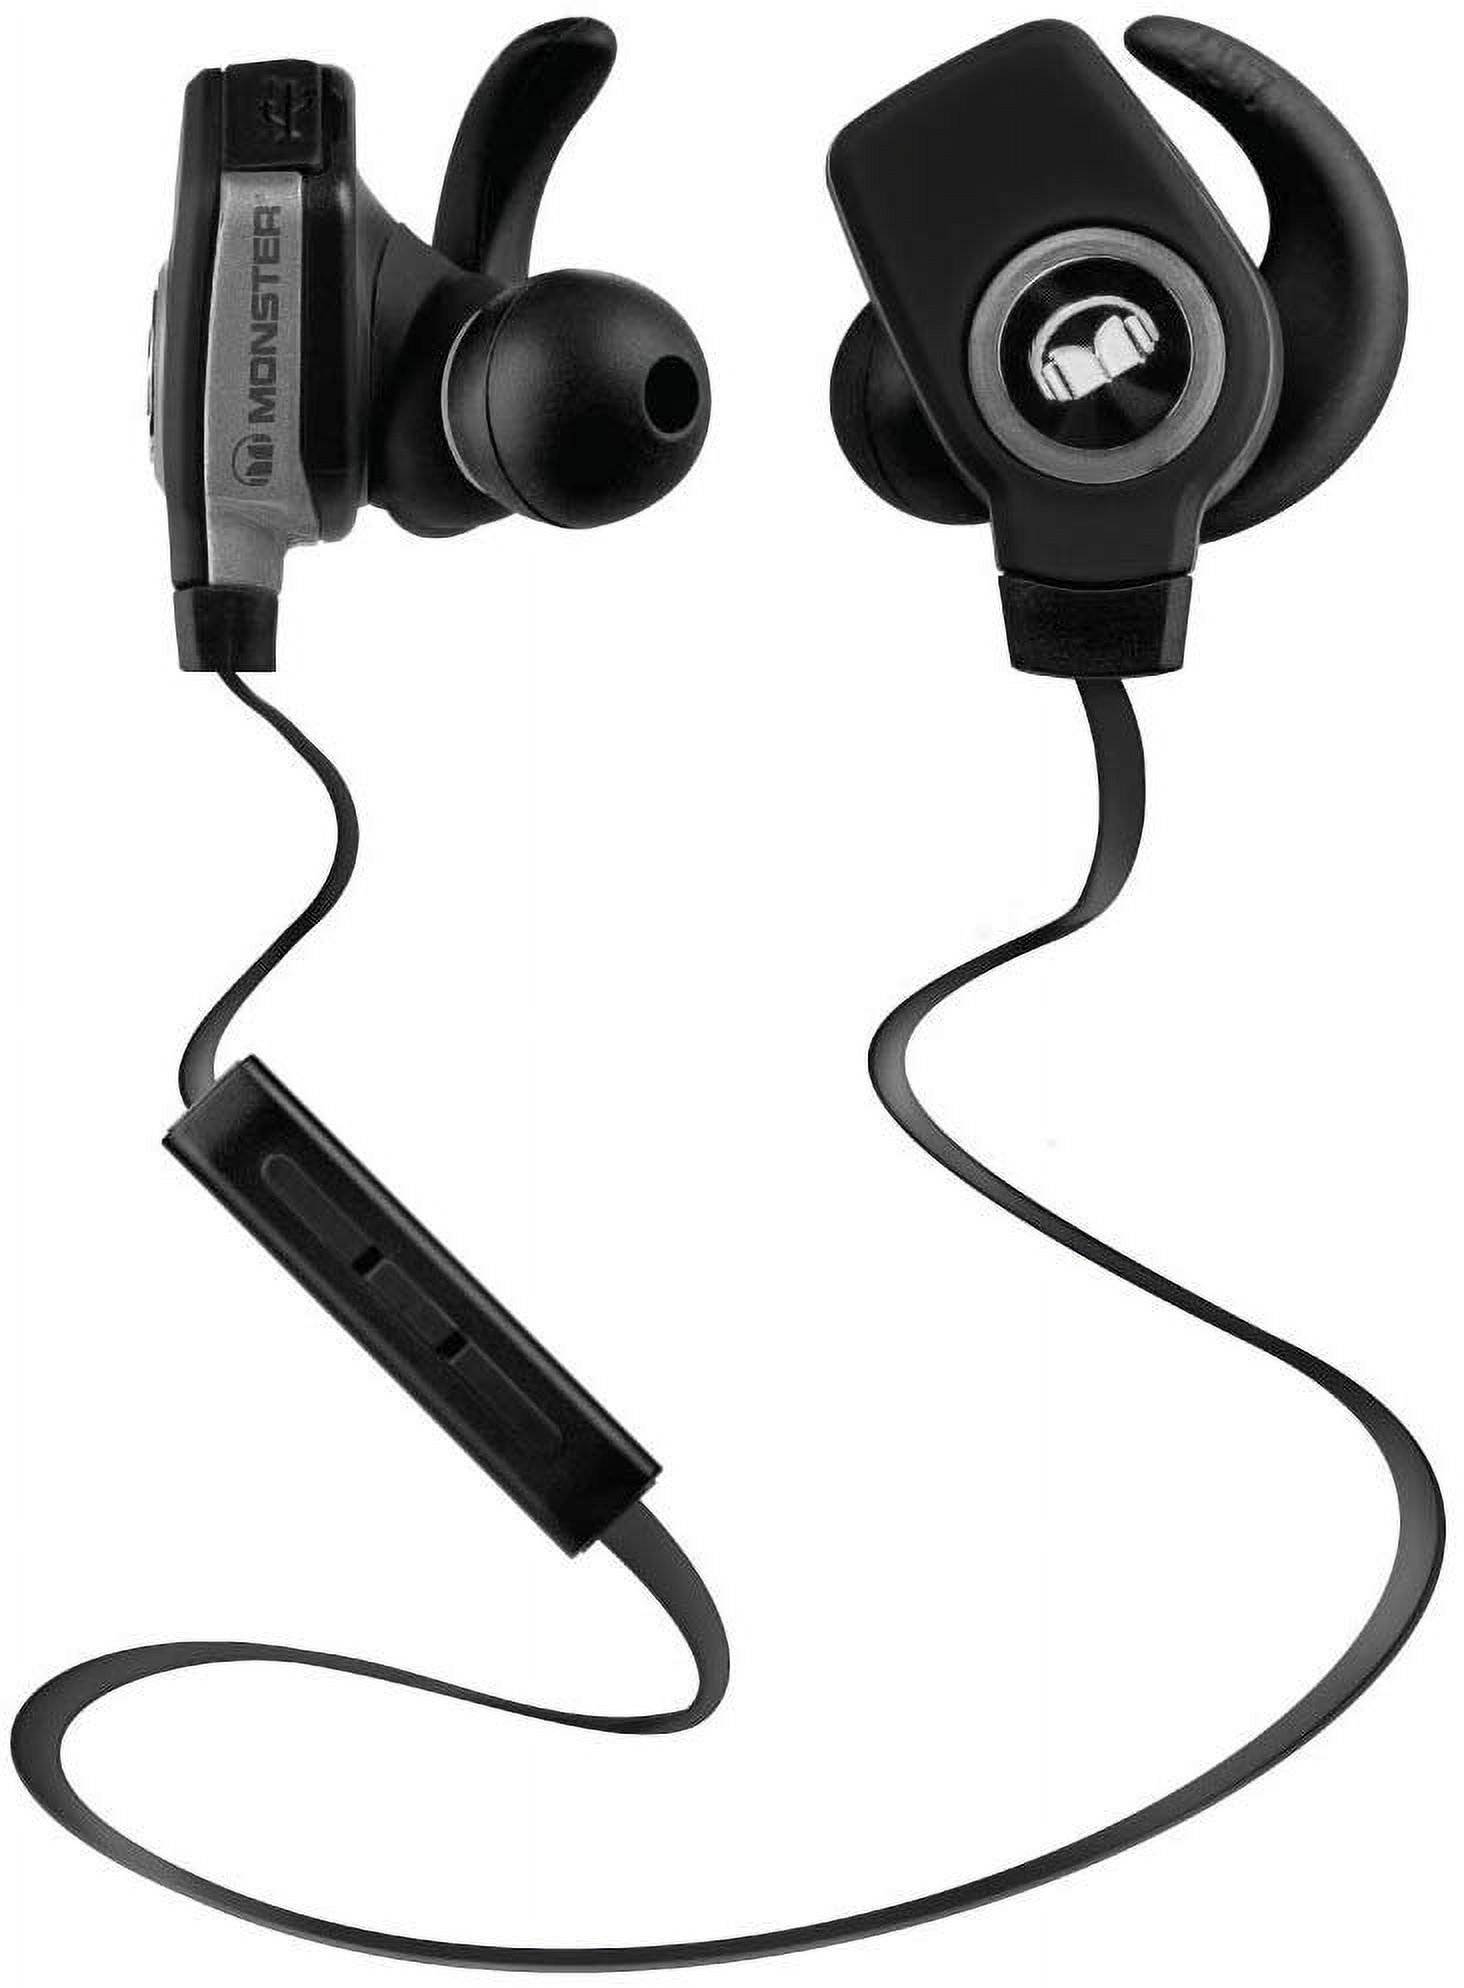 Monster Cable iSport SuperSlim Earset - image 1 of 5